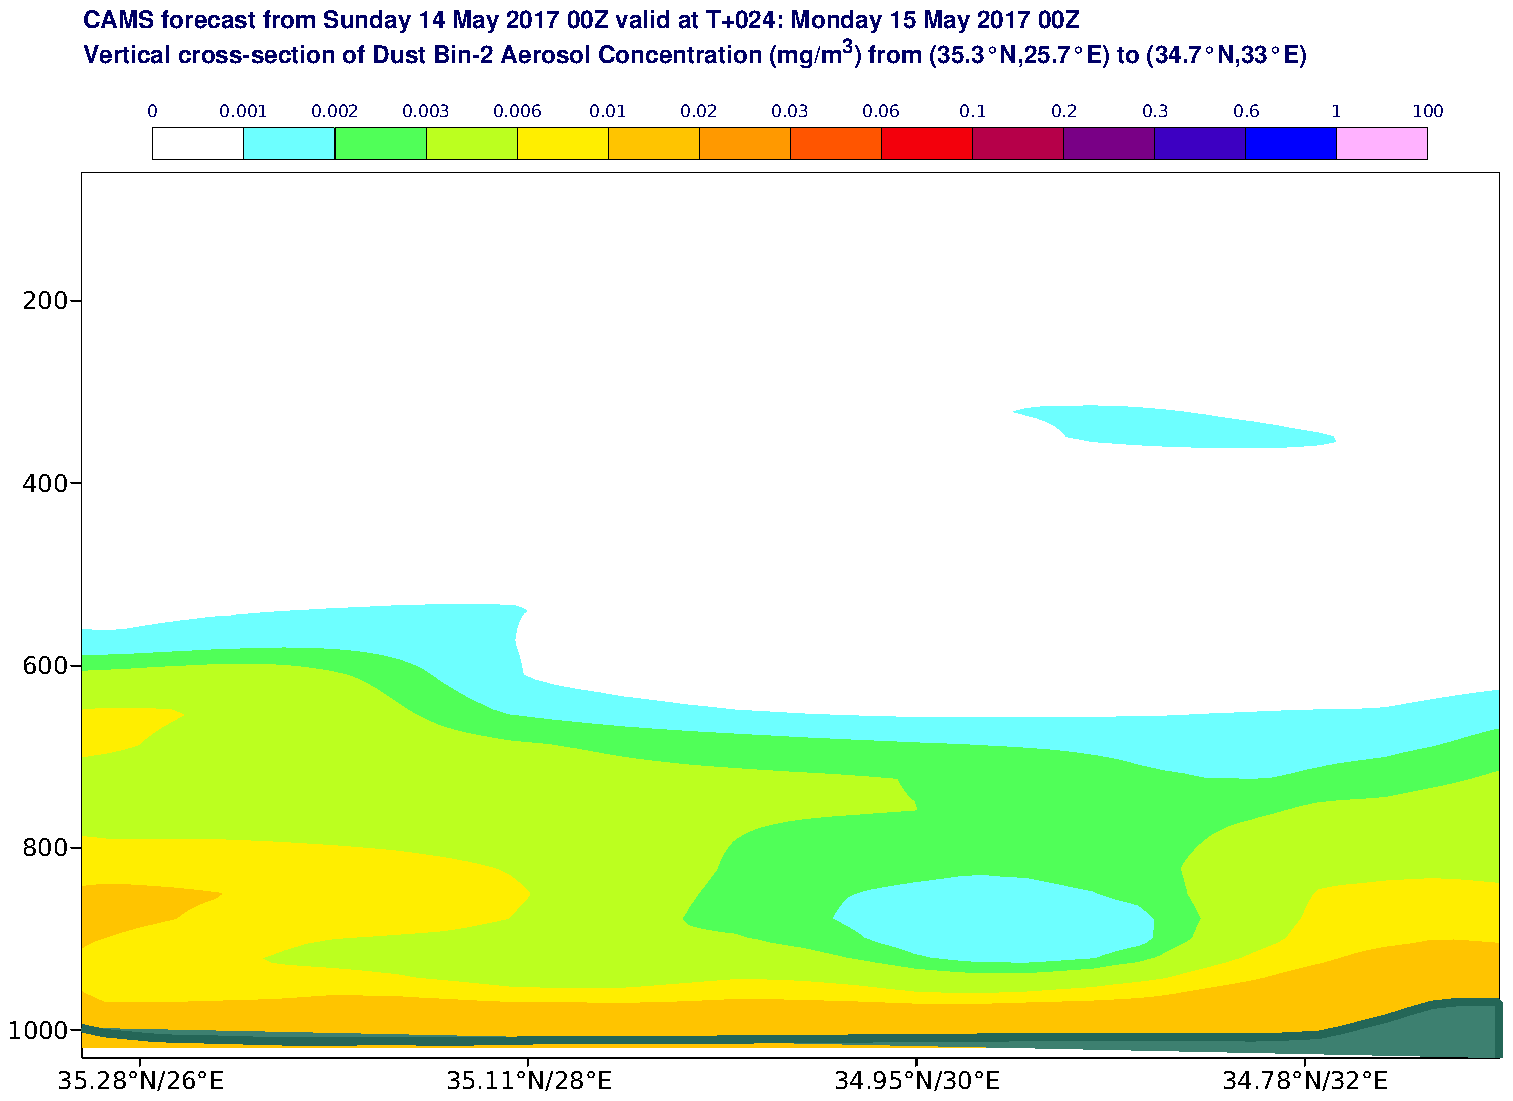 Vertical cross-section of Dust Bin-2 Aerosol Concentration (mg/m3) valid at T24 - 2017-05-15 00:00